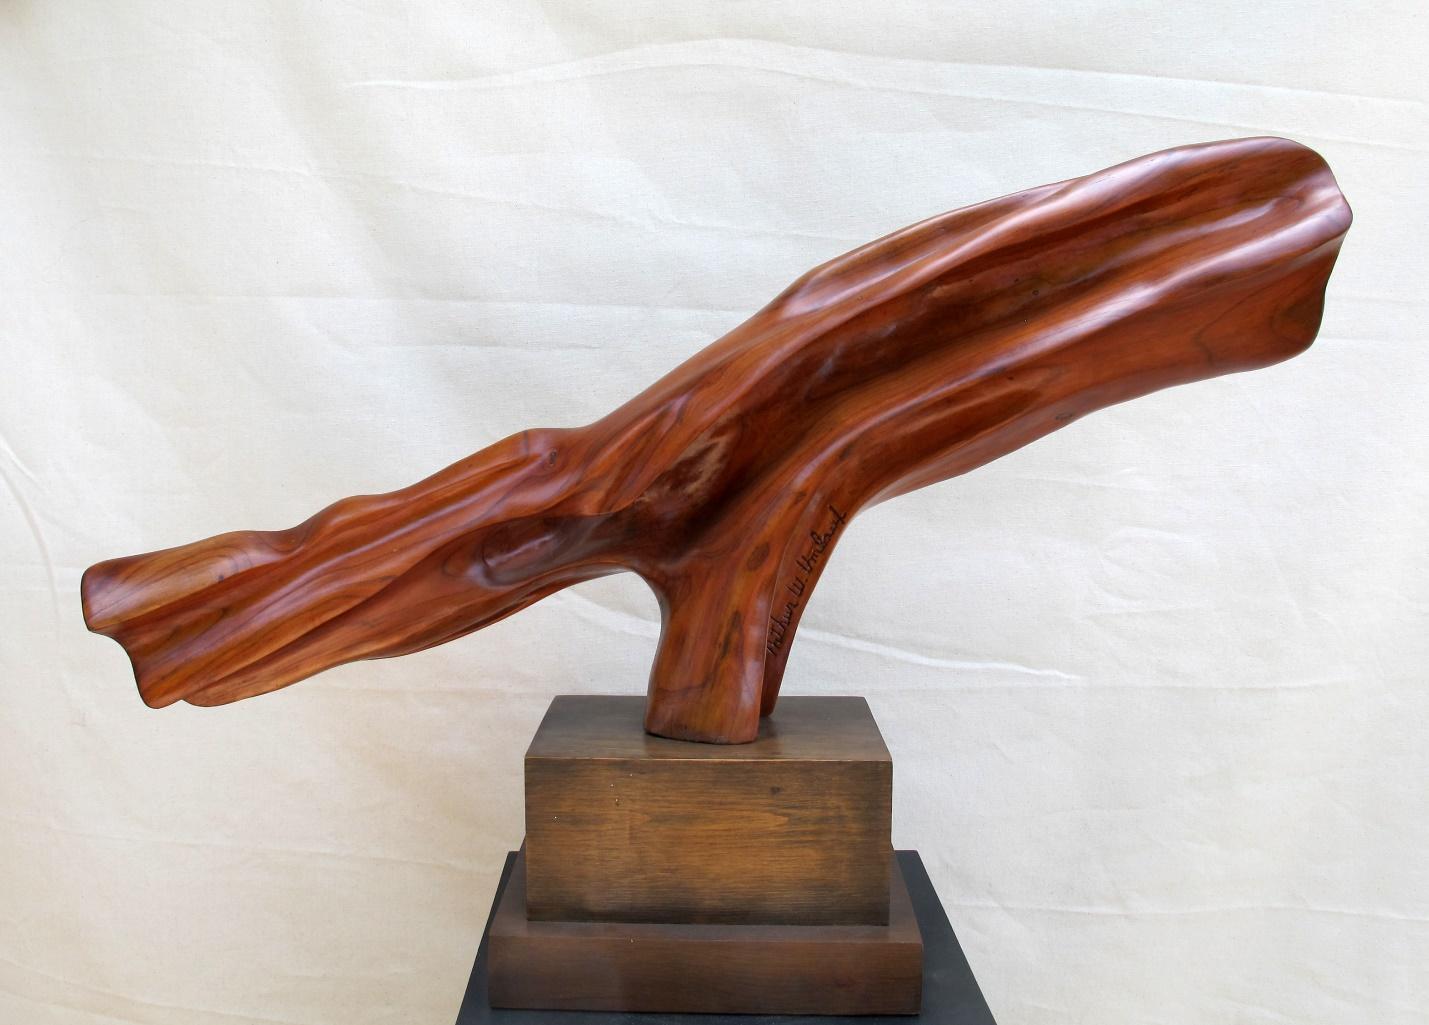 A wooden sculpture of a tree branch on a wooden base, part of the Sculpture Collection.